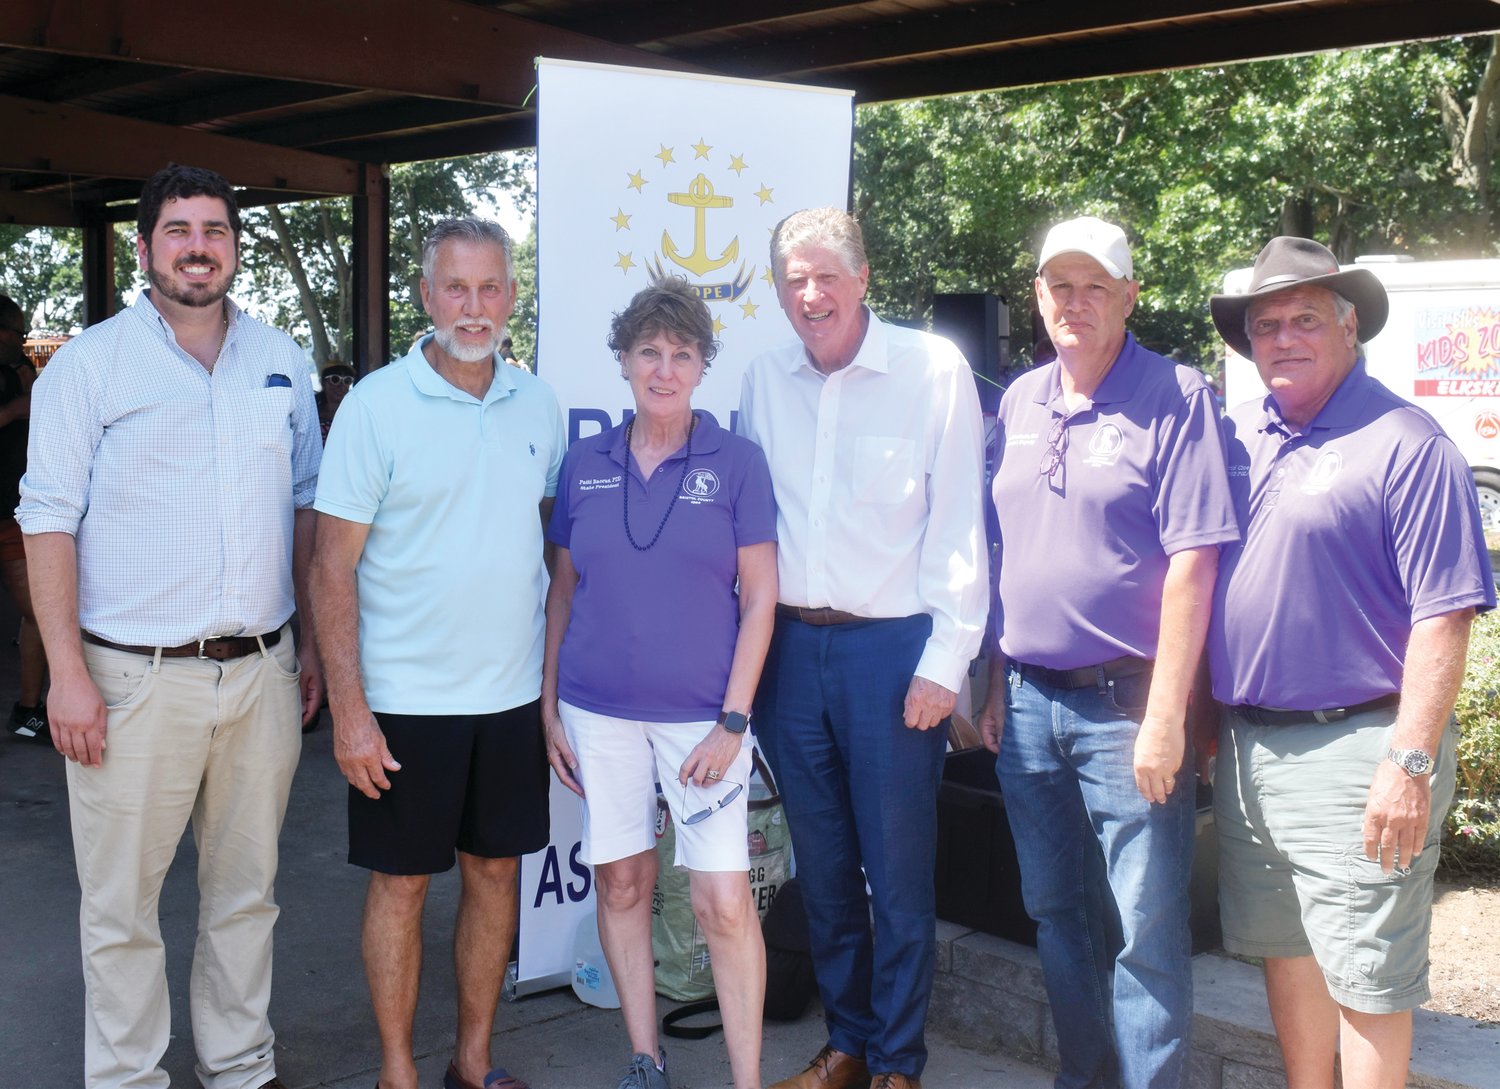 OUTSTANDING OFFICIALS: Gov. Dan McKee is joined by State rep. Joseph Solomon Jr. , State Elks Association President Patti Baccus, 365 Outing Chairman Mark Eaton, RI Grand Lodge Special Deputy Officer Leo Blanchette and Tri-City Leading Knight Rick Swanson.